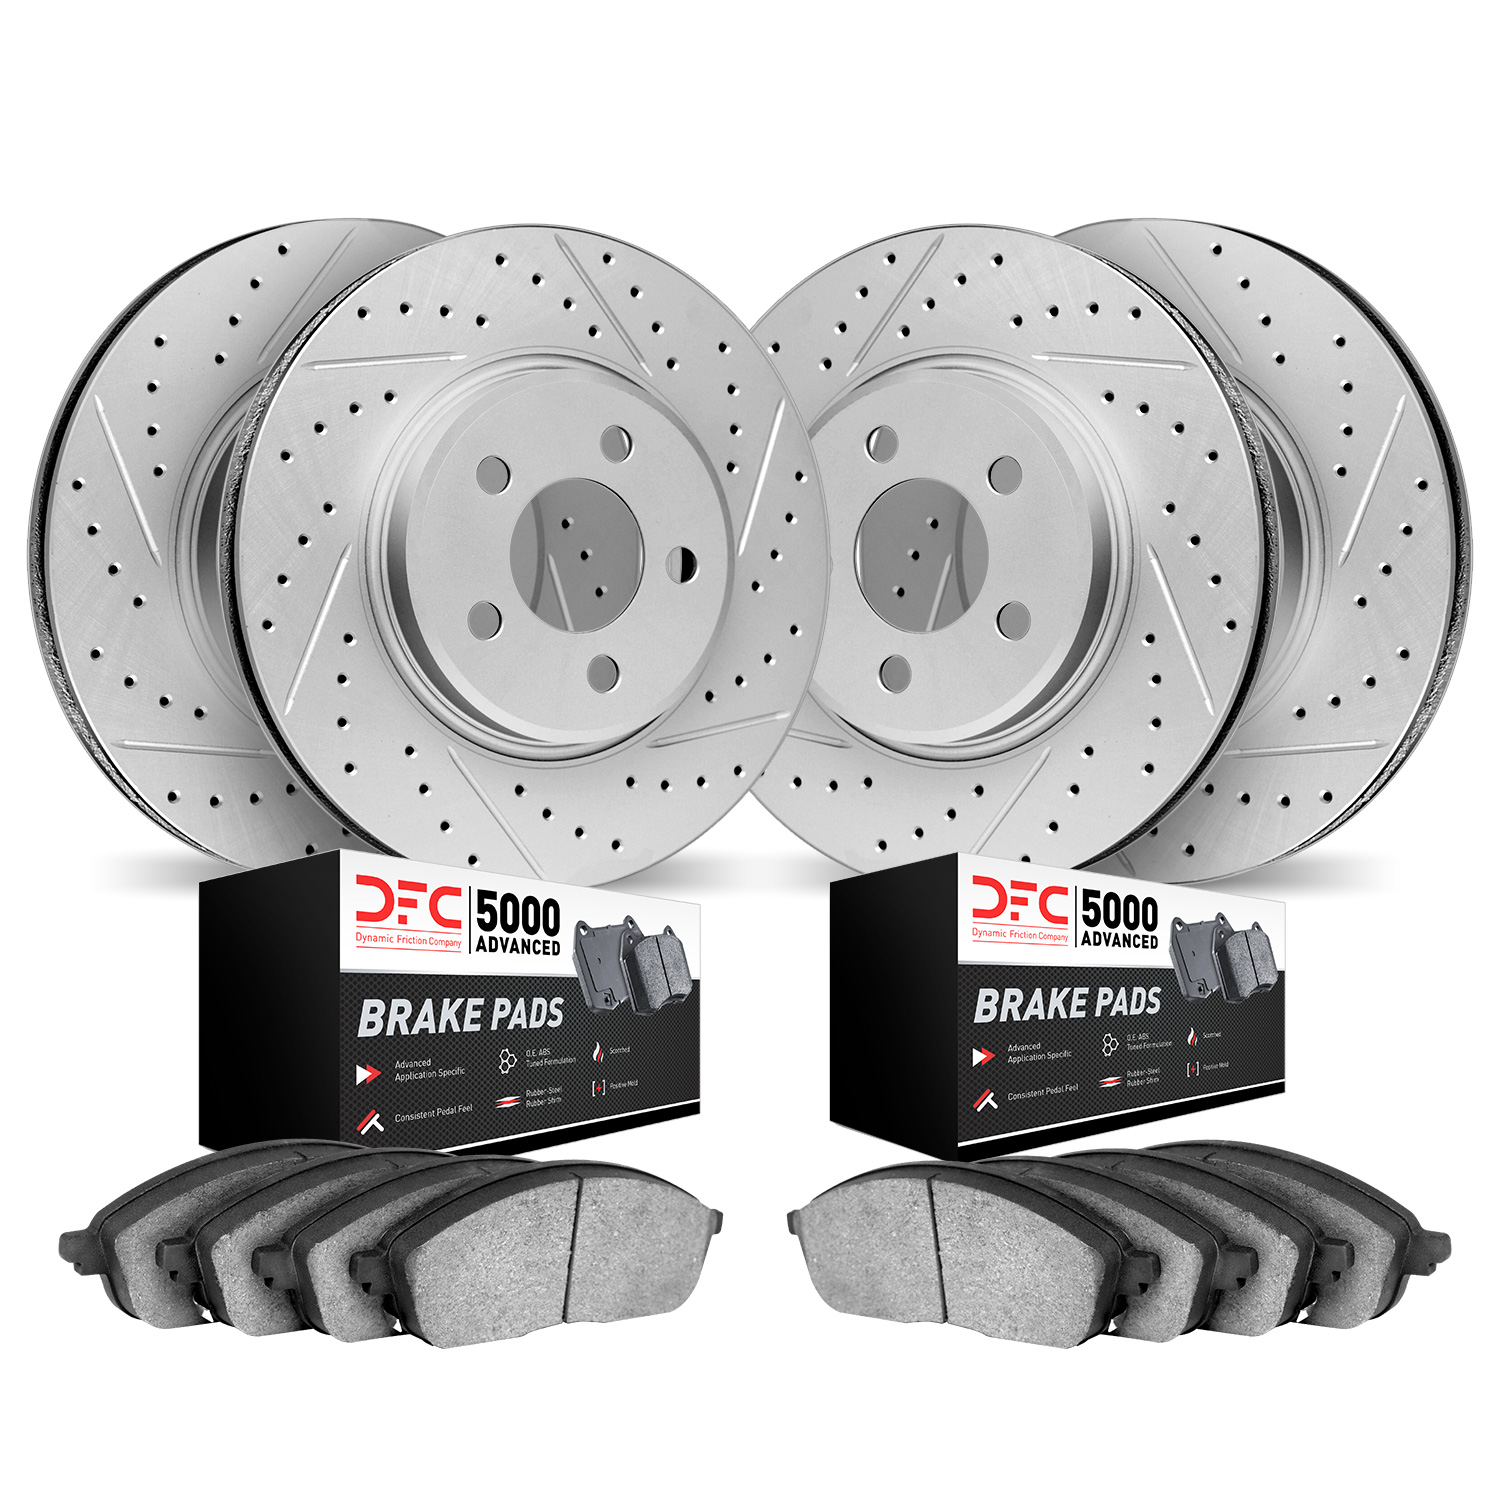 2504-31016 Geoperformance Drilled/Slotted Rotors w/5000 Advanced Brake Pads Kit, 2006-2007 BMW, Position: Front and Rear